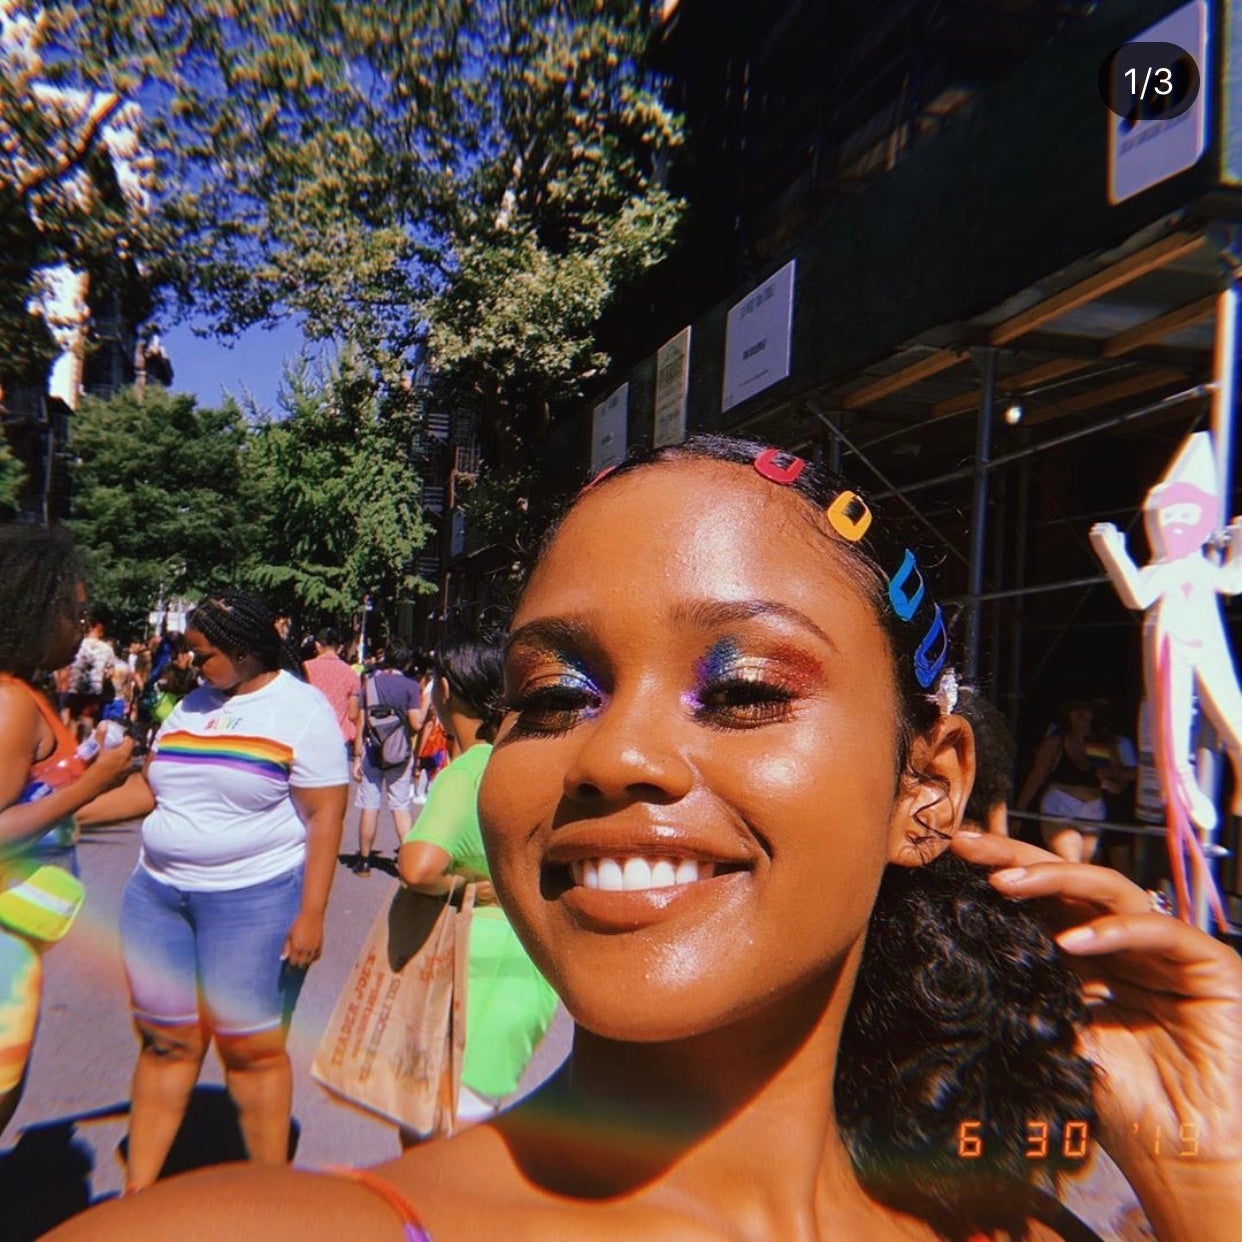 The Best Beauty Looks From NYC Pride March